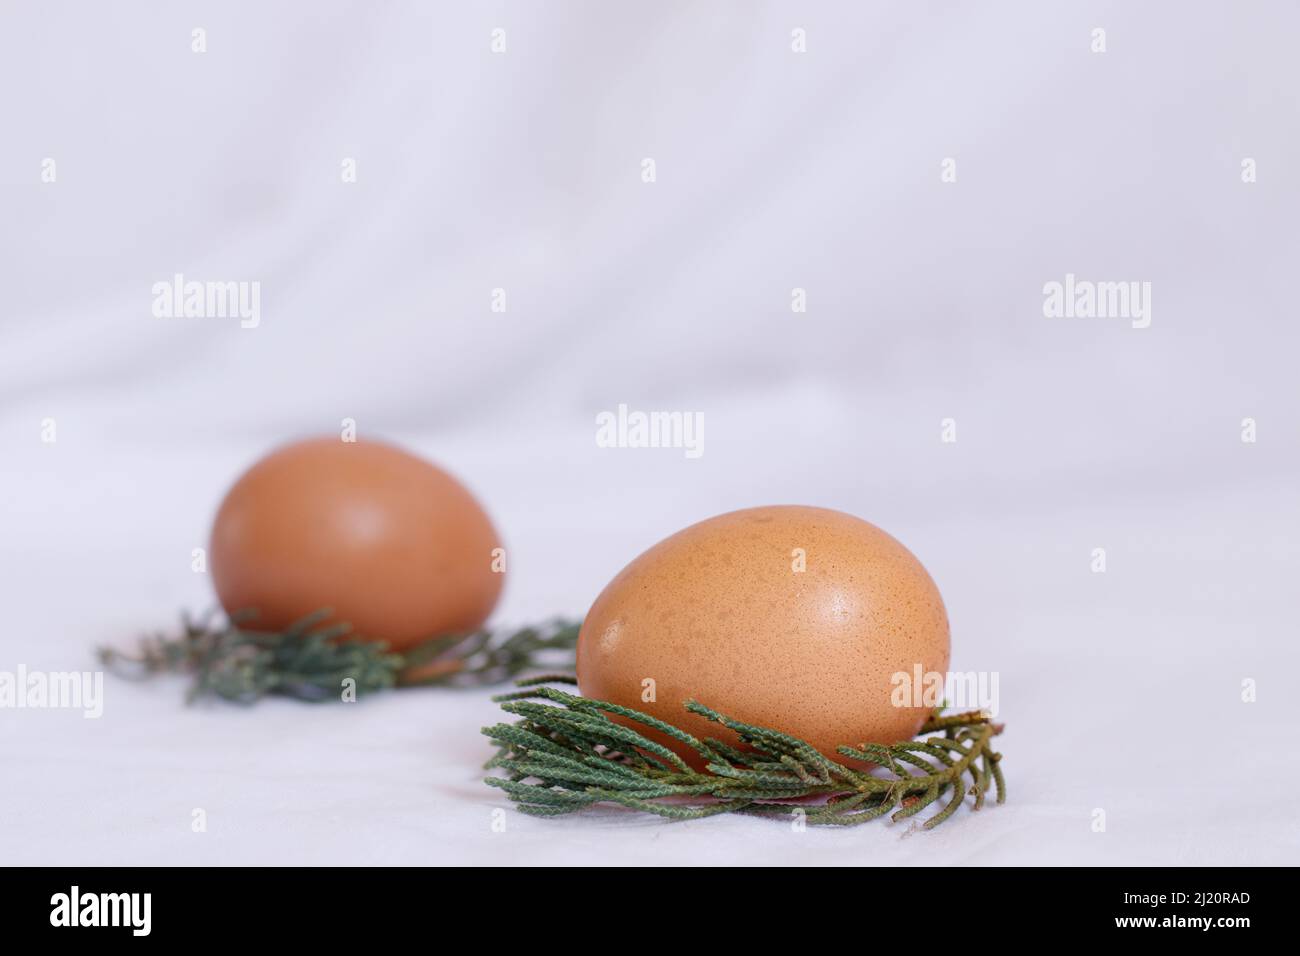 Bright and airy simple Easter aesthetic background of two brown egg nestled on a nest of spruce leaves Stock Photo